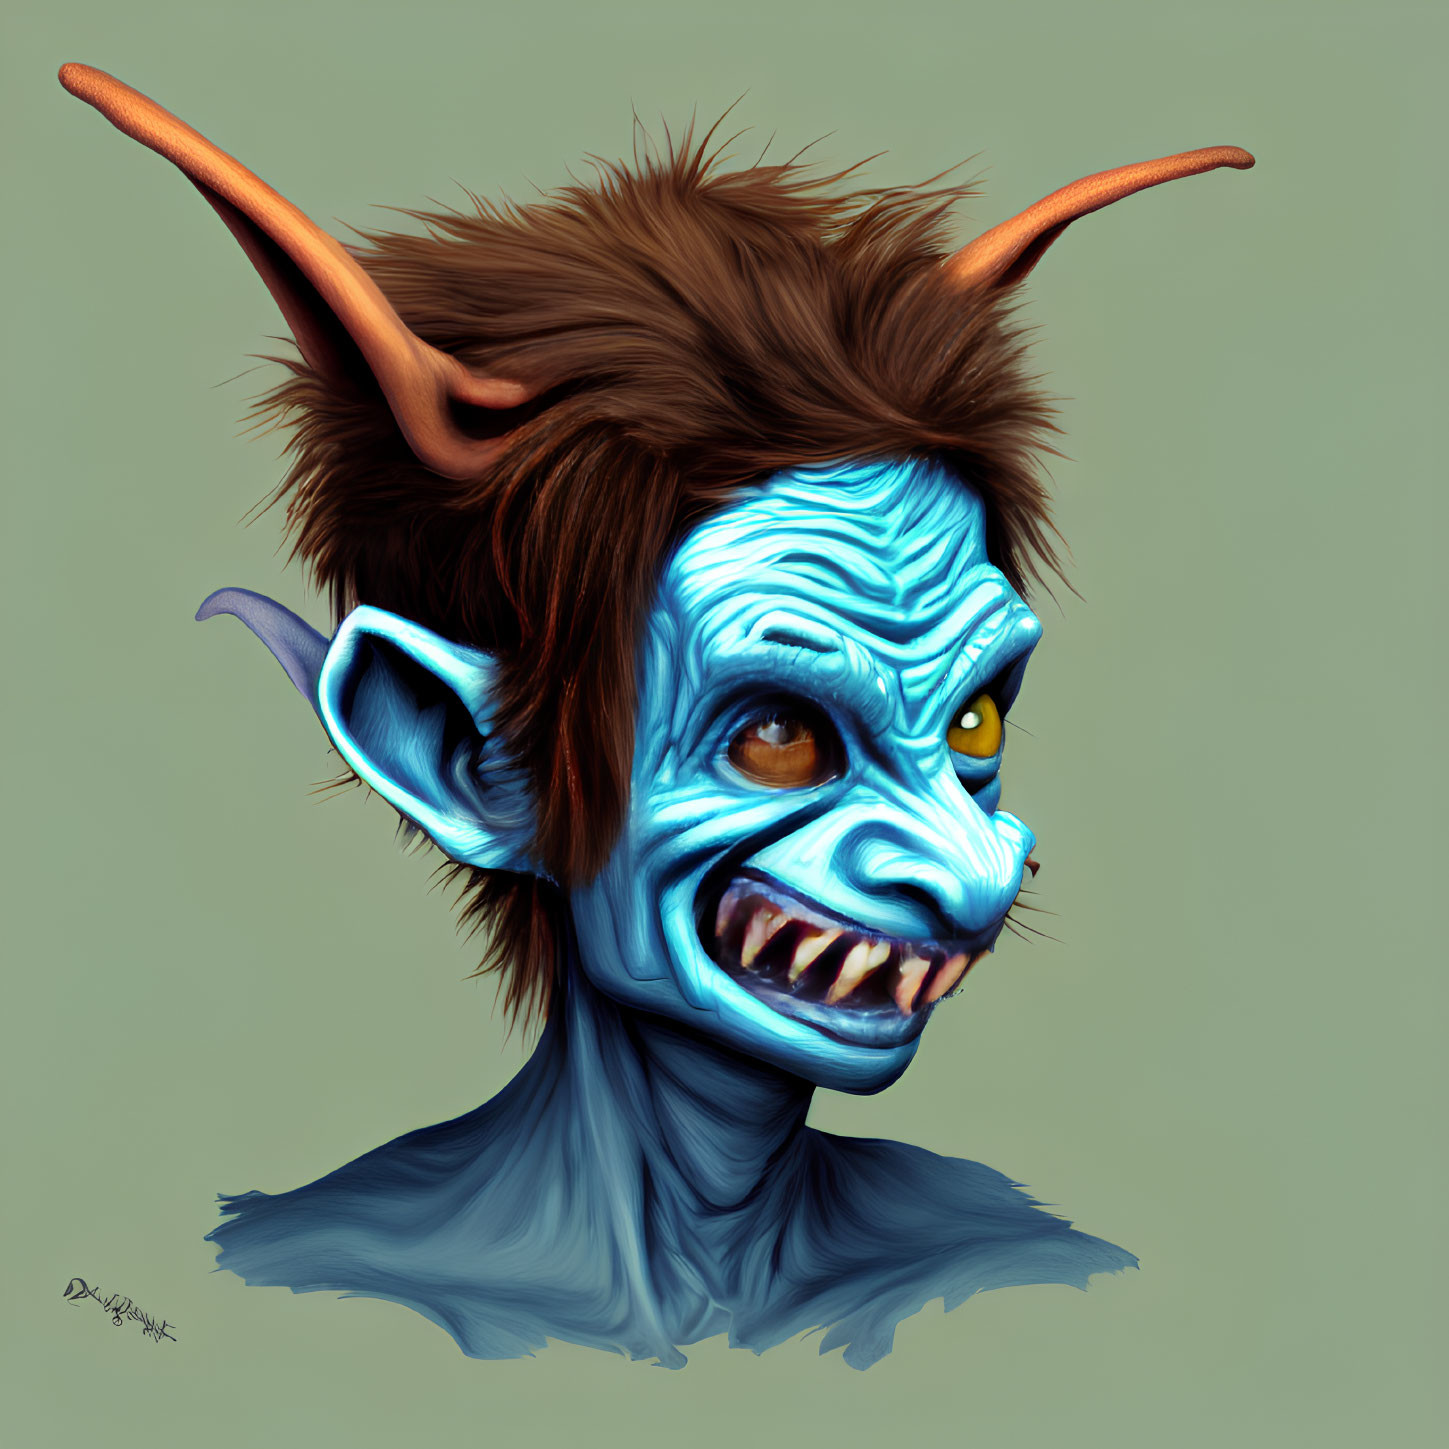 Fantasy creature with blue skin, pointed ears, yellow eyes, brown hair, and horns.